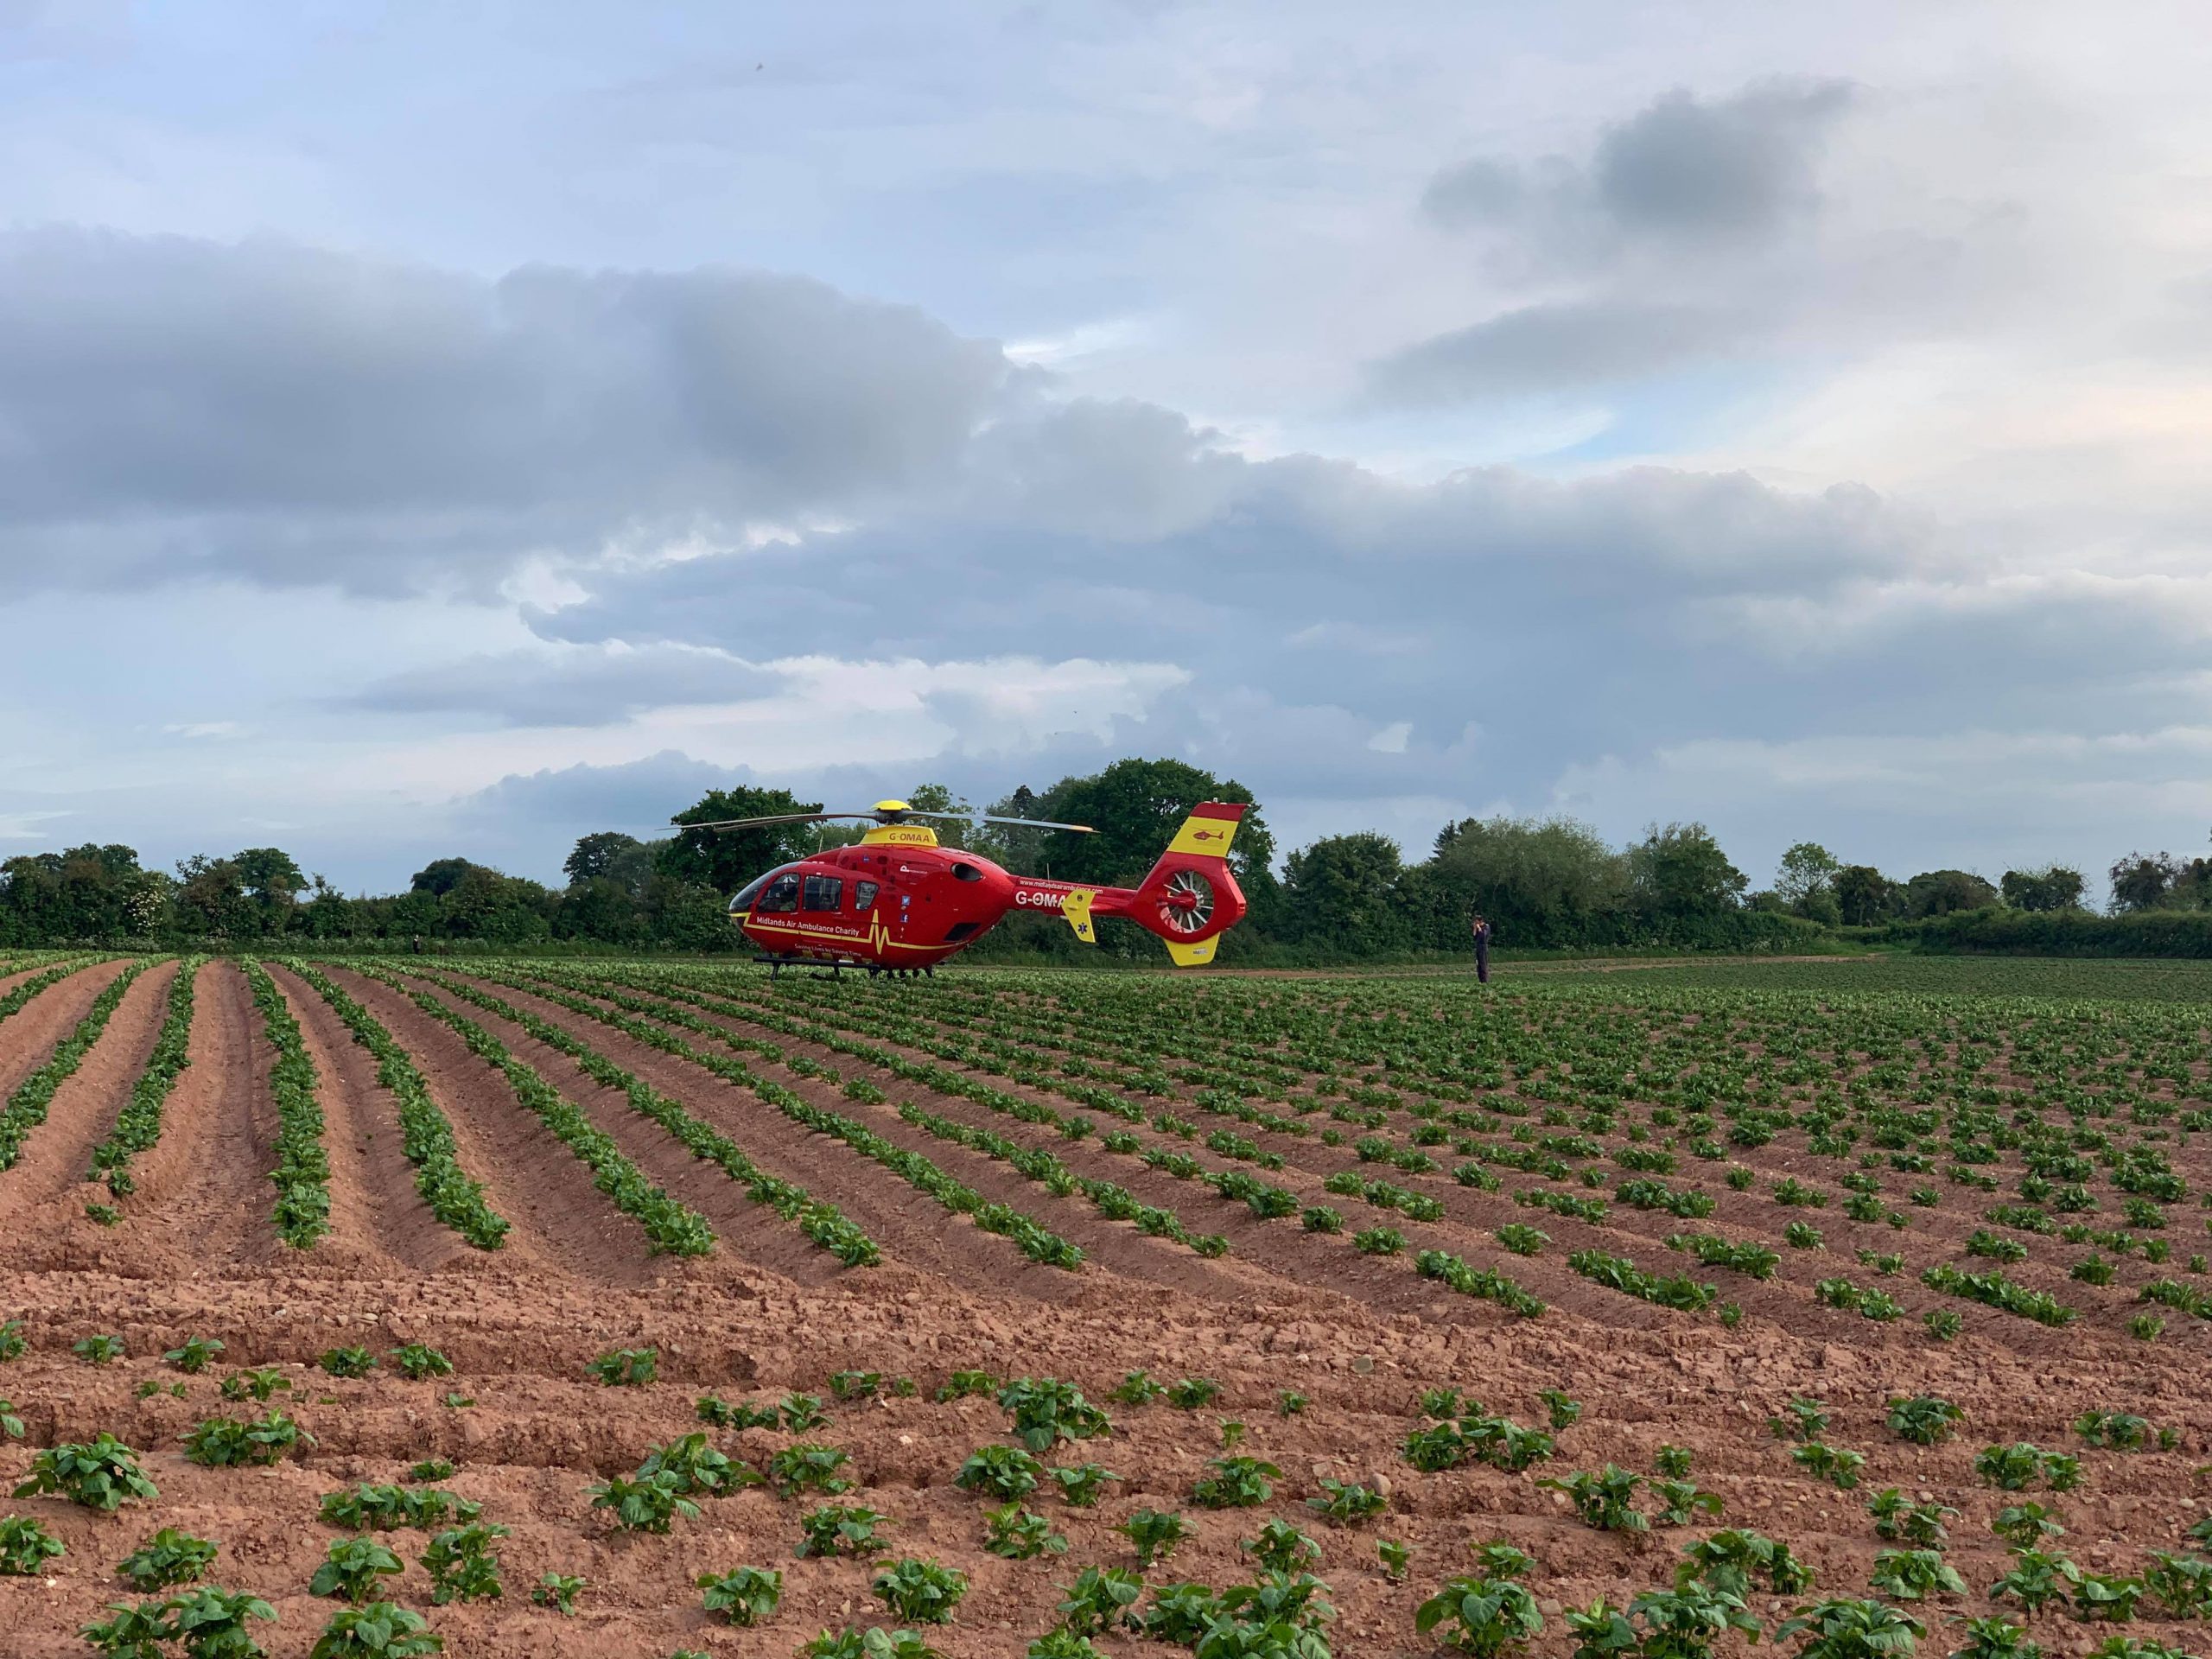 NEWS | Air Ambulance lands in Hereford